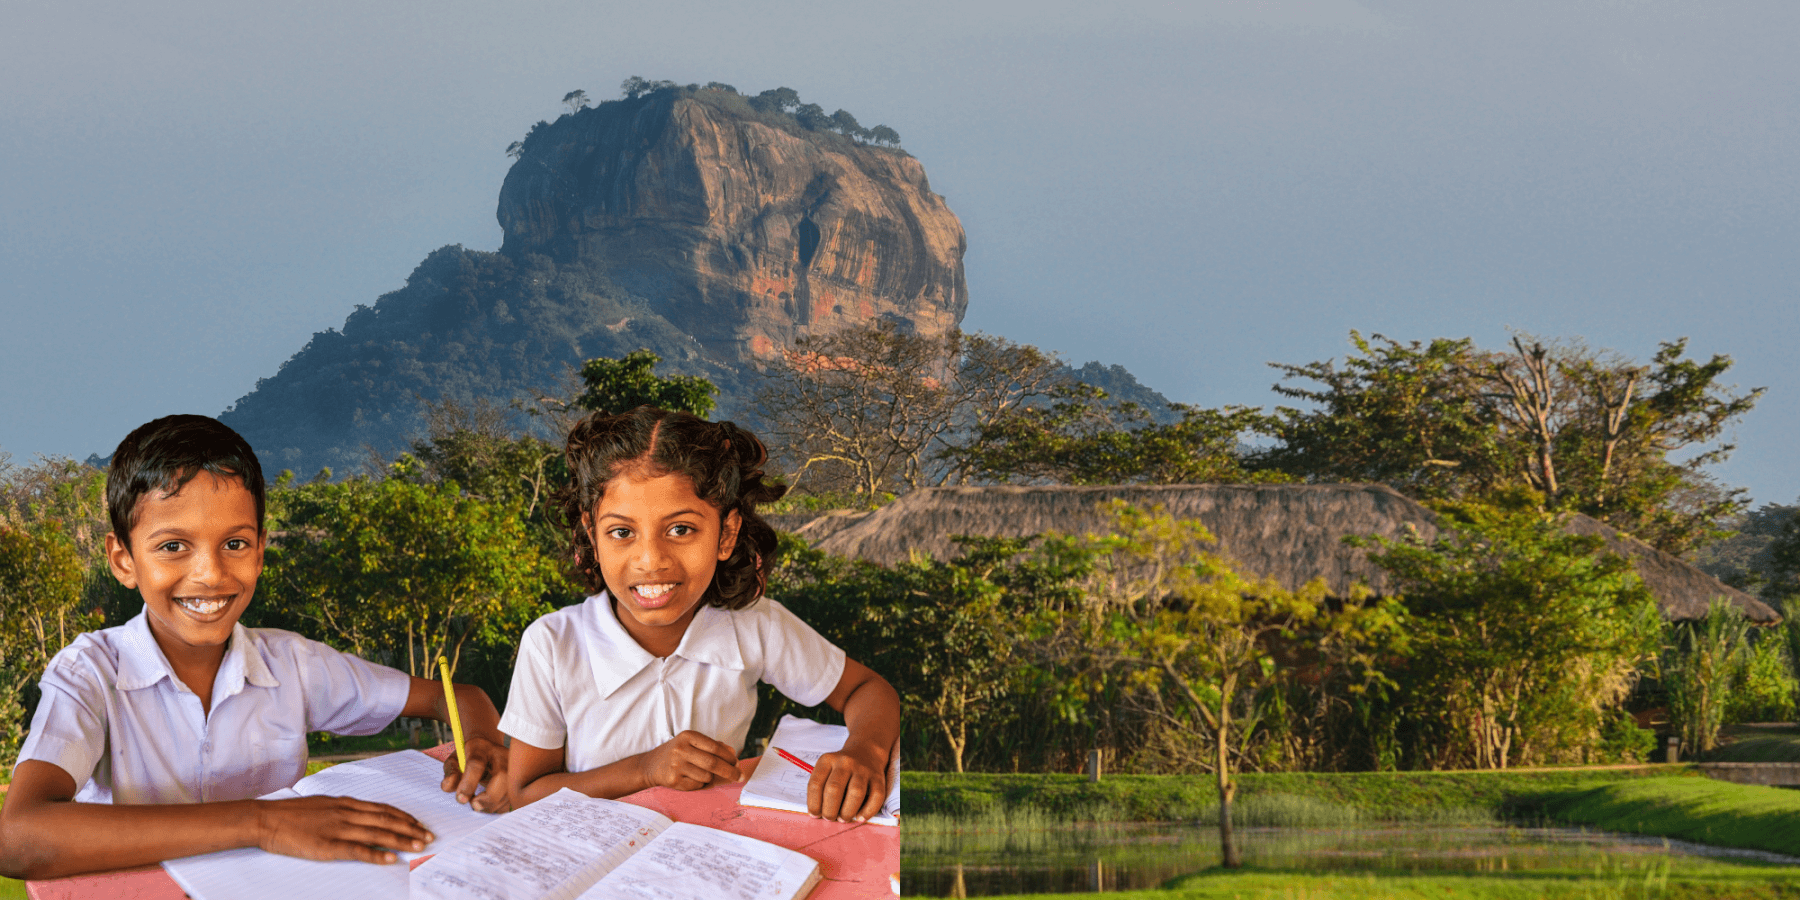 When we build the foundations of community ecosystems, they may not be ostentatious like other much-admired achievements of Sri Lanka, but they will secure the future of our children. © Renaissance Sri Lanka